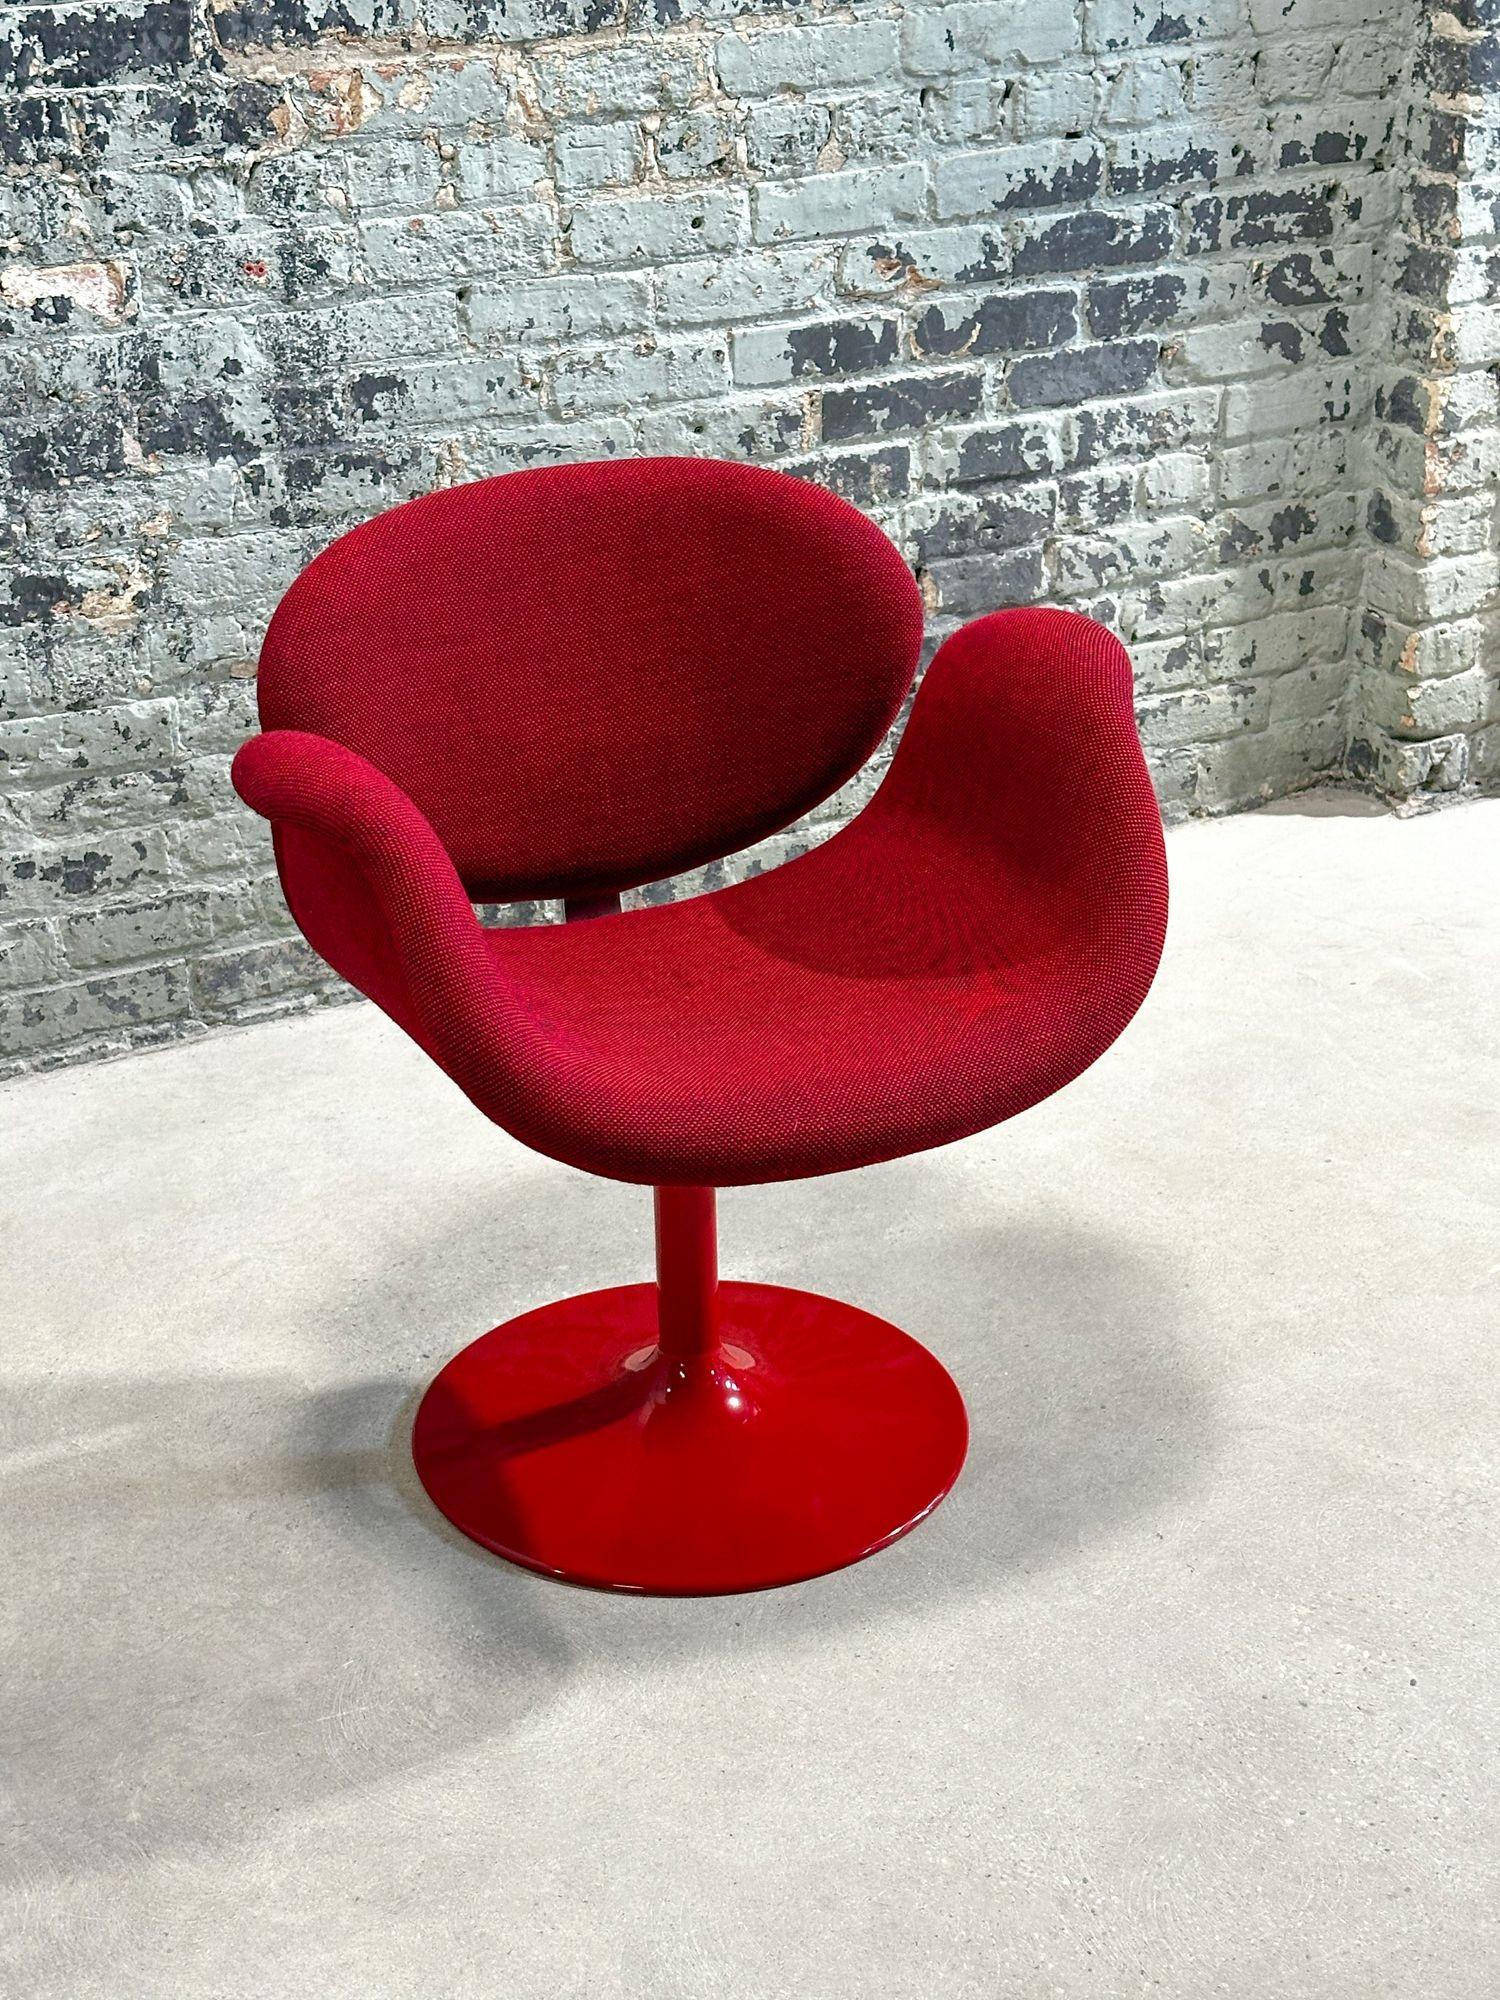 Pierre Paulin Tulip Midi Chair w/Aluminum Base, by Artifort 1960 In Good Condition For Sale In Chicago, IL